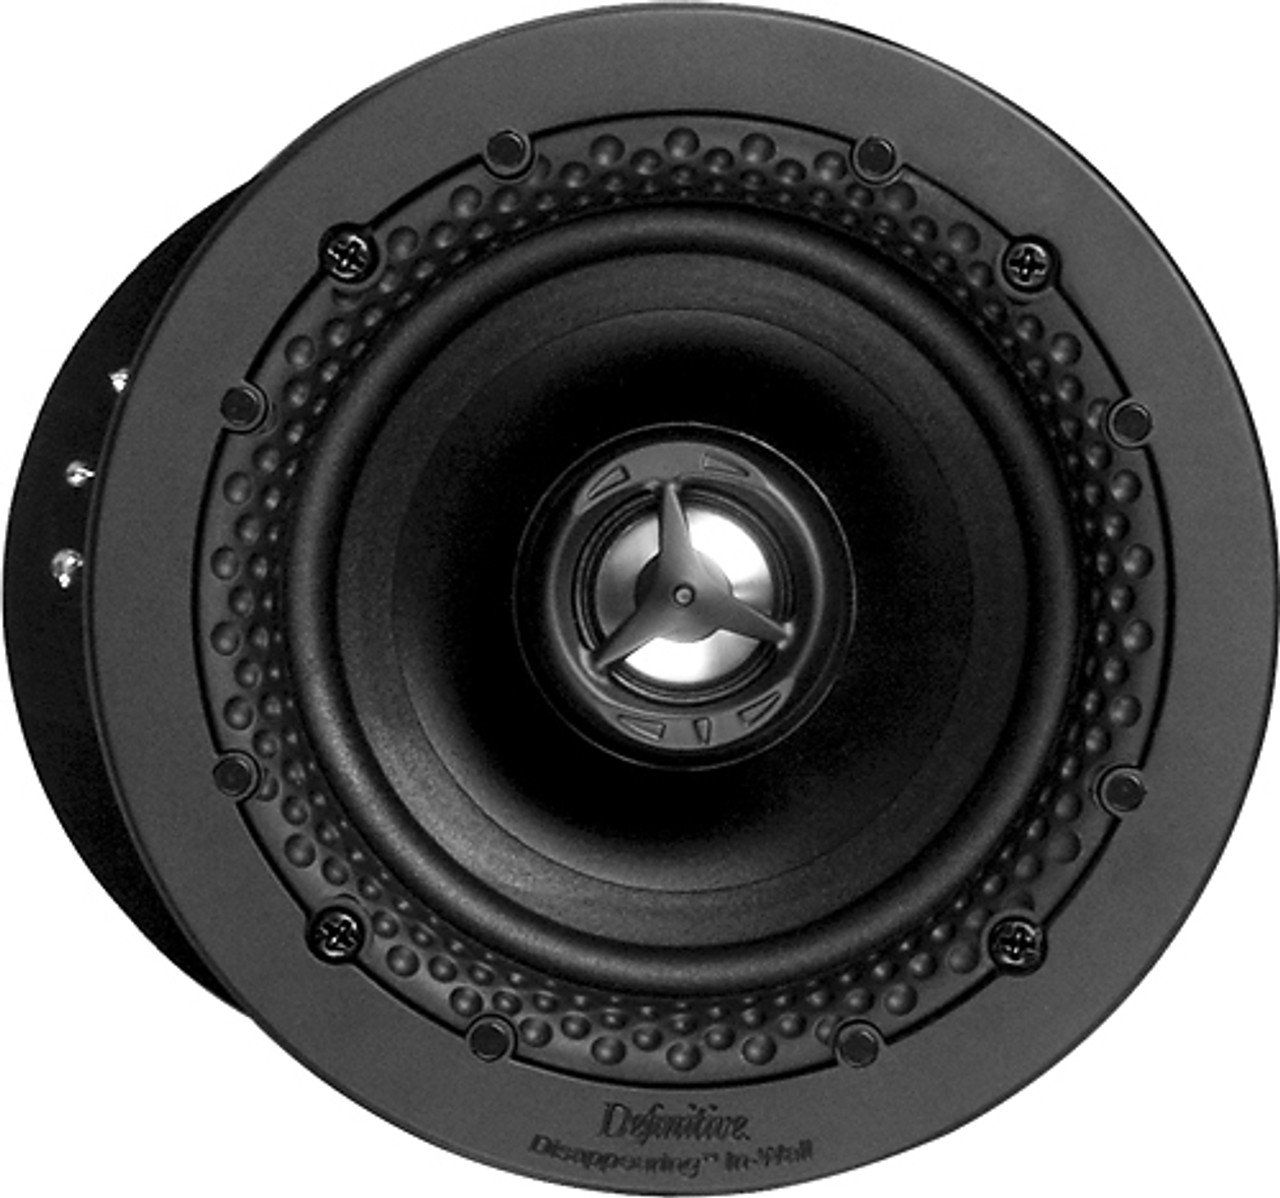 Definitive Technology - Disappearing In-Wall Series 4-1/2" In-Wall/In-Ceiling Loudspeaker (Each) - Black